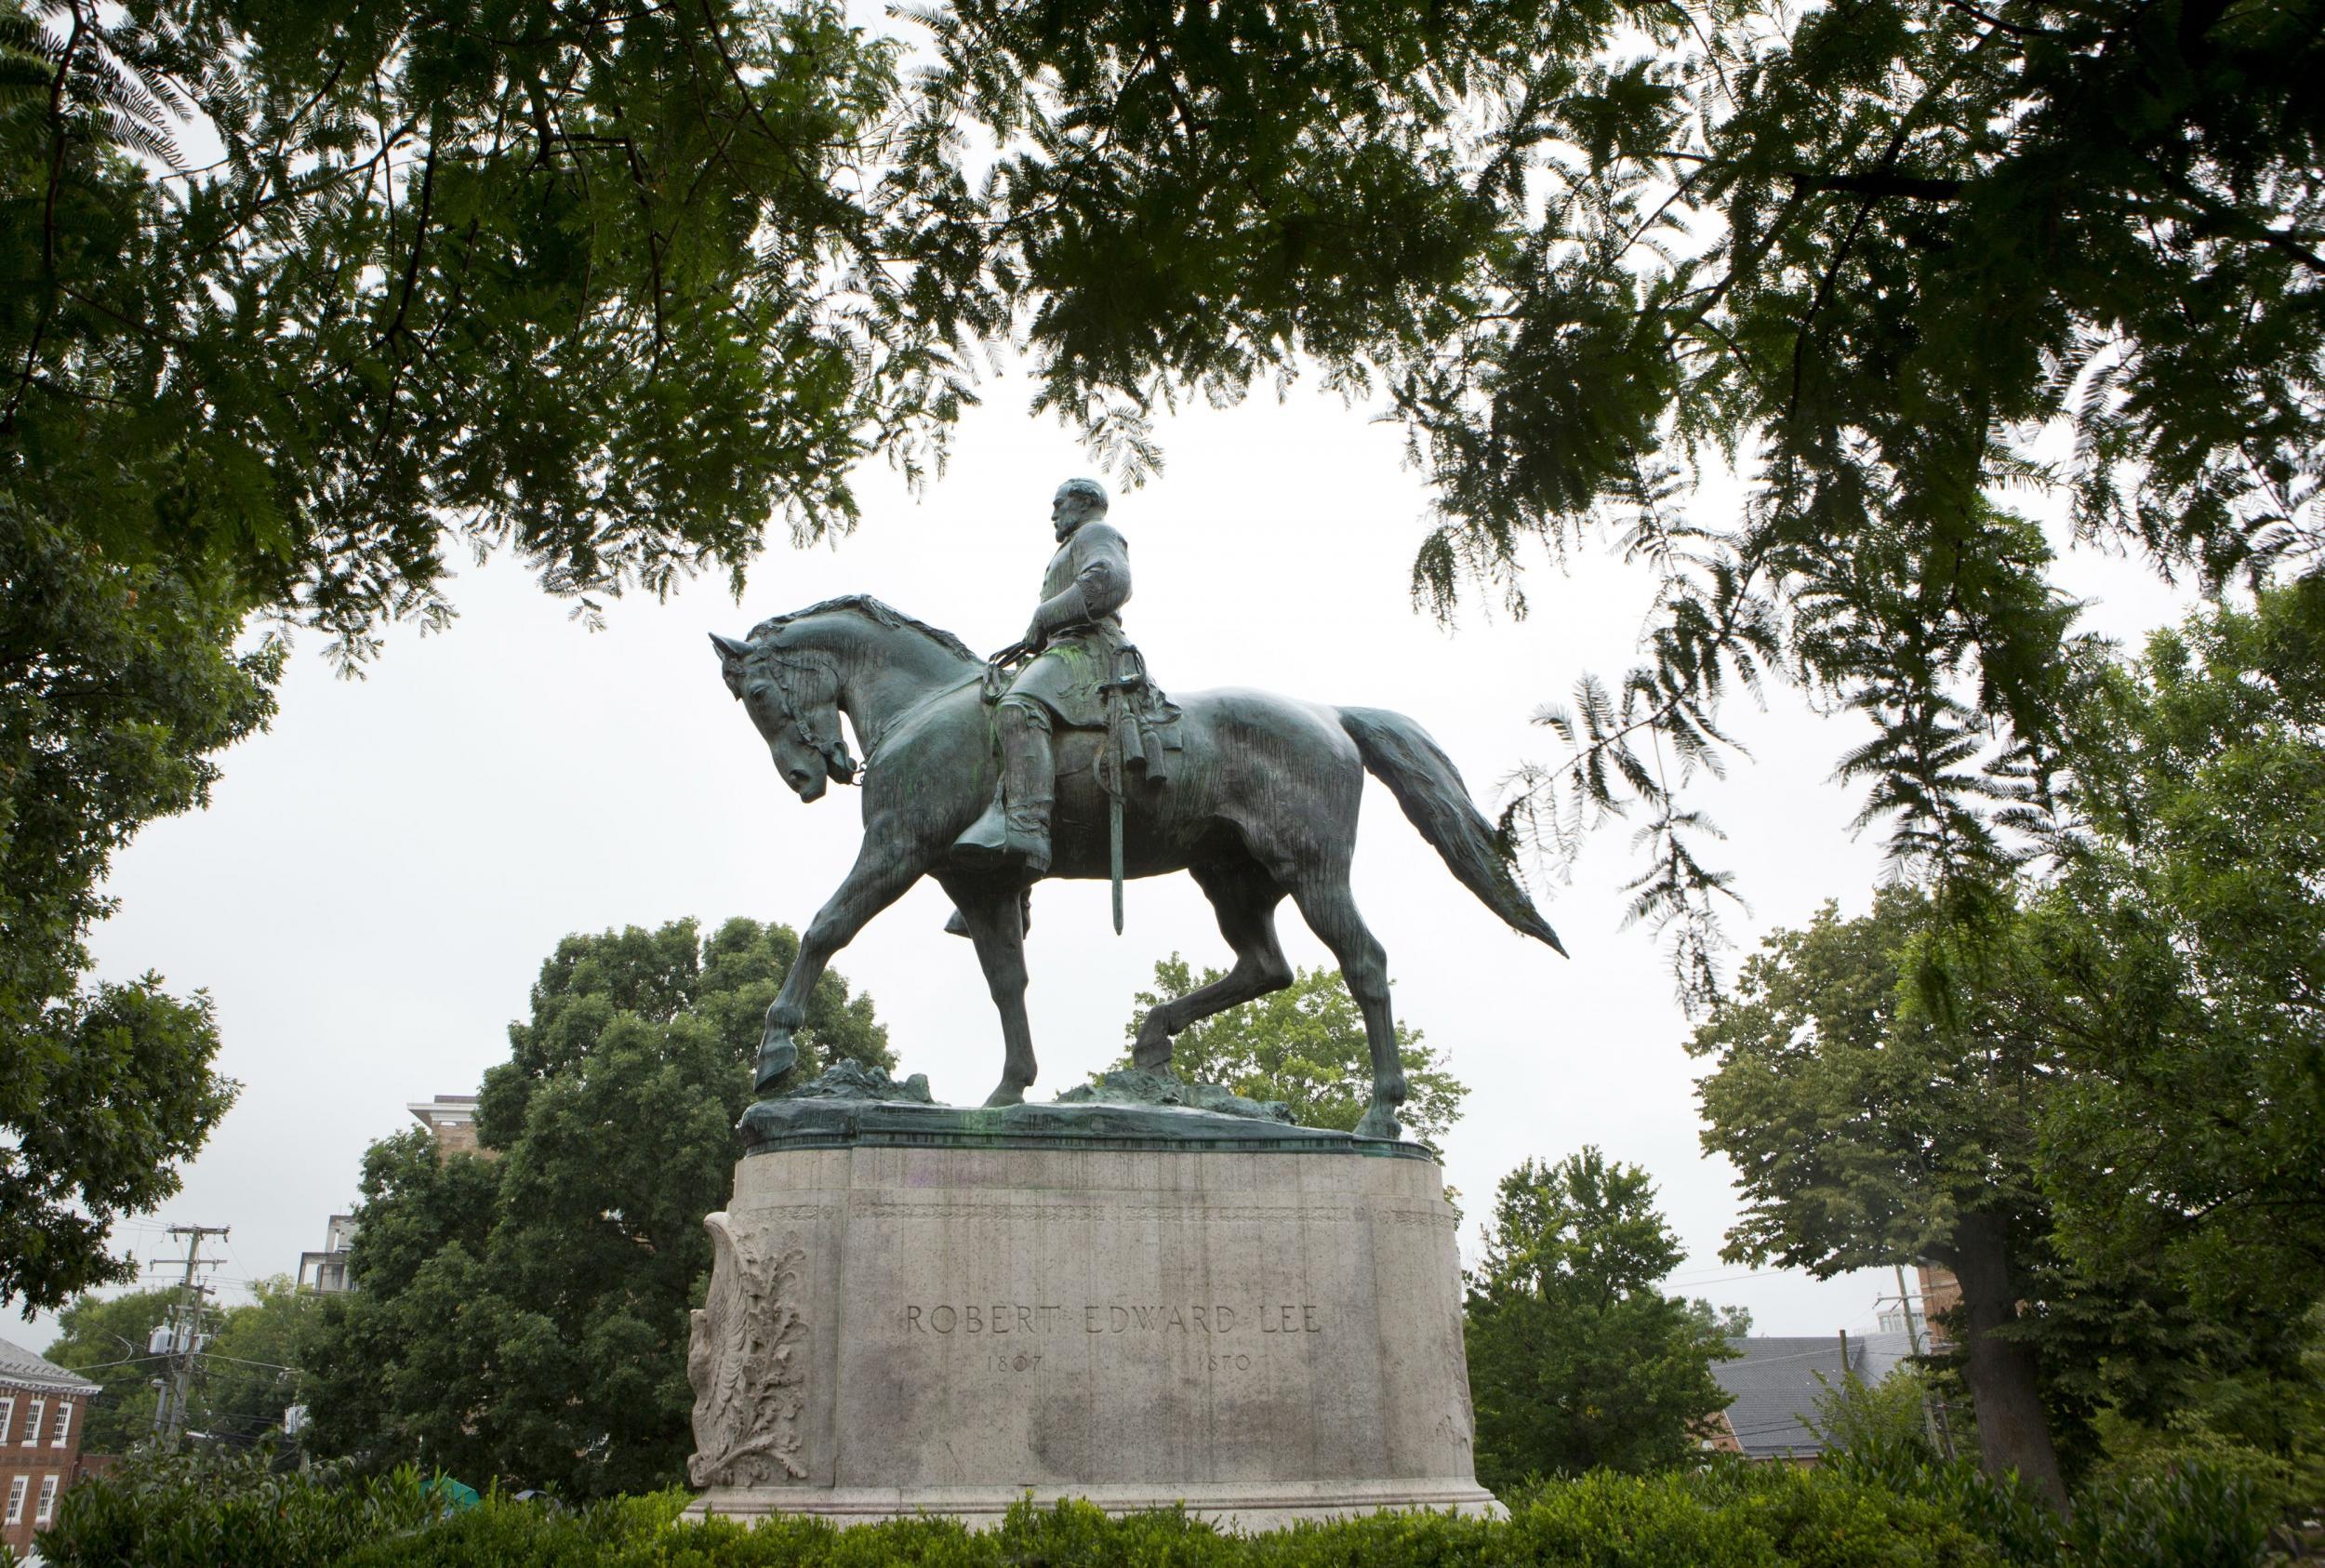 A young woman was killed after white supremacists protested over the planned removal of Lee's statue